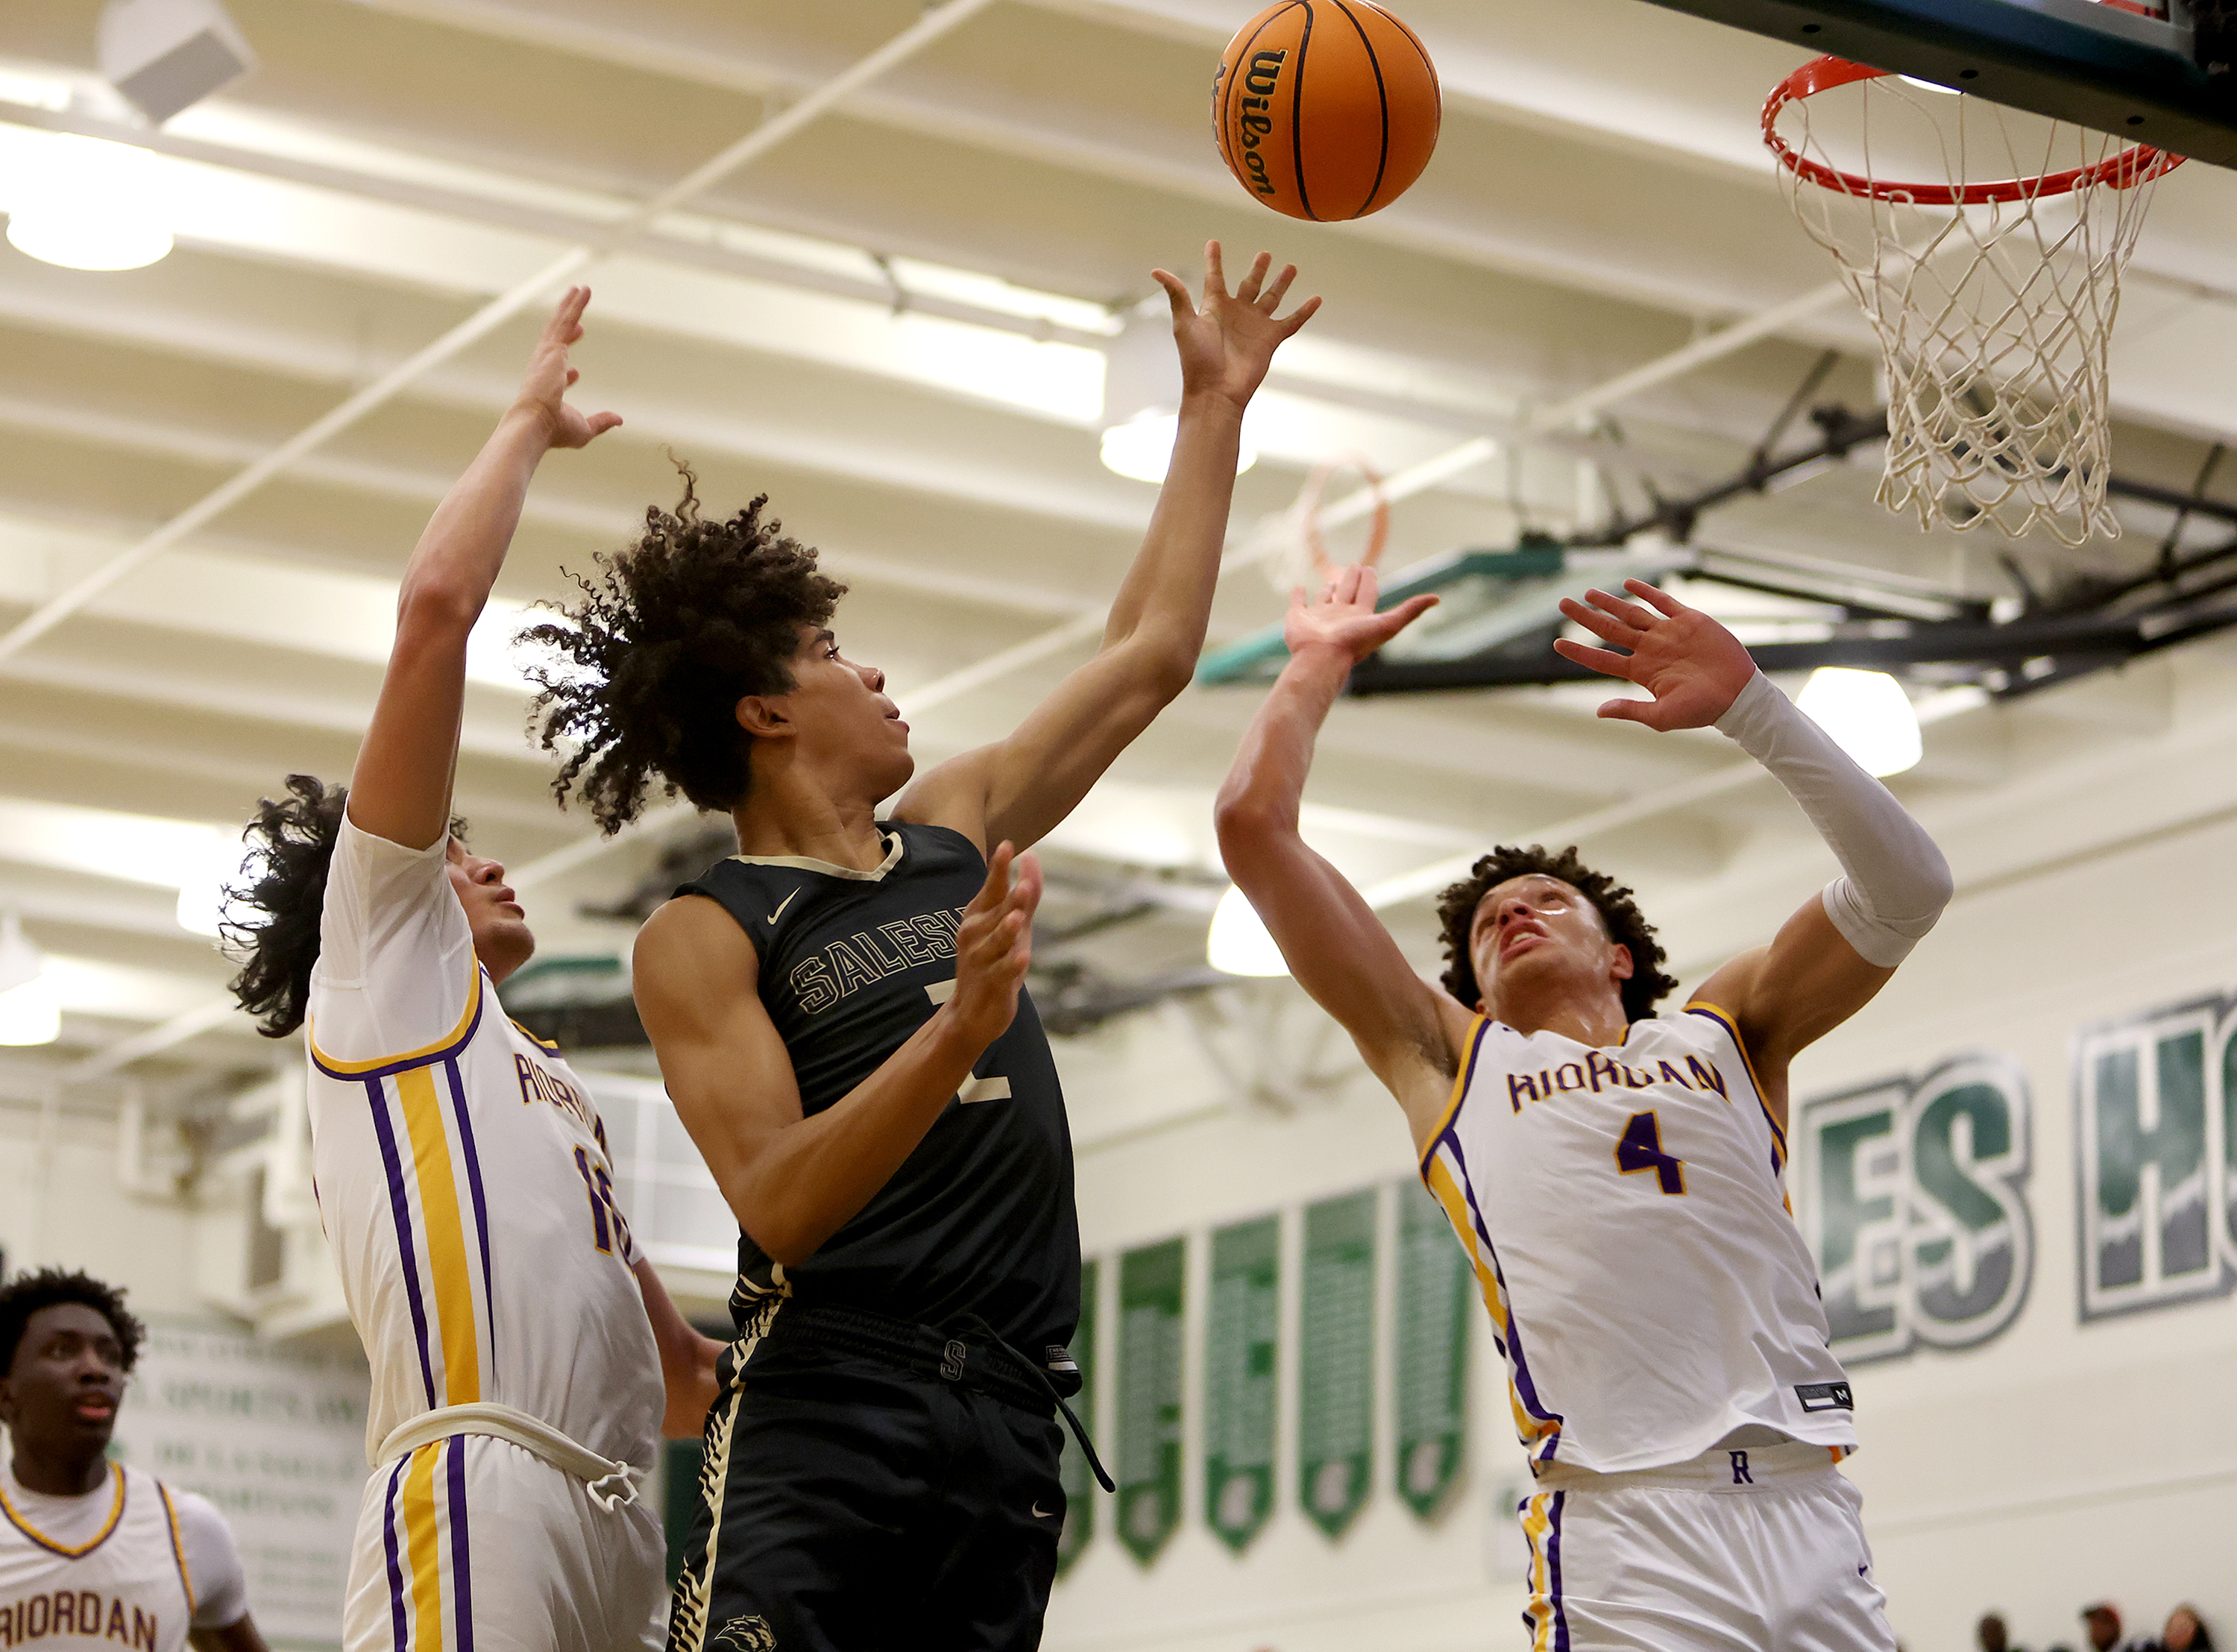 Great, intense action between Riordan and Salesian in the MLK Classic at De La Salle on Jan. 15. 